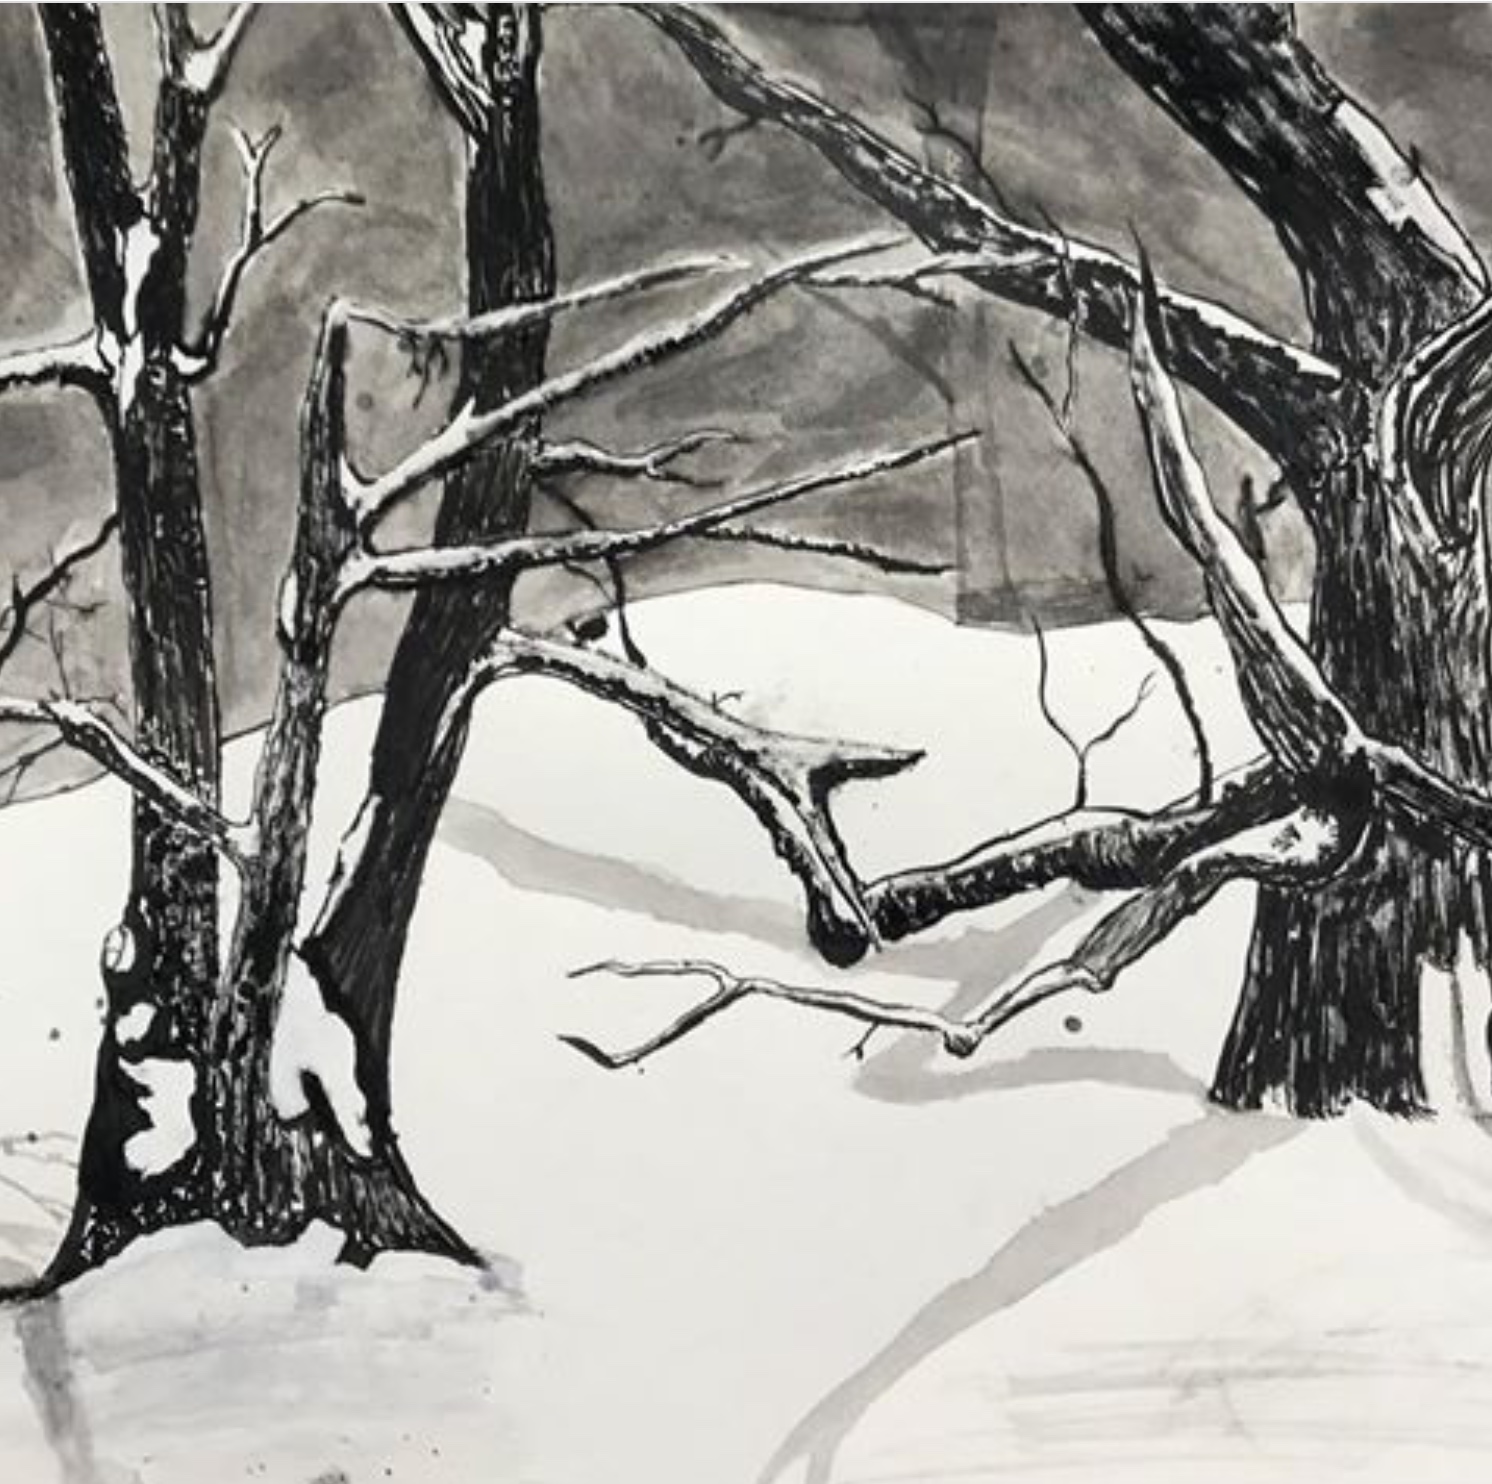 painting created by high school student of bare trees with snow and shadows